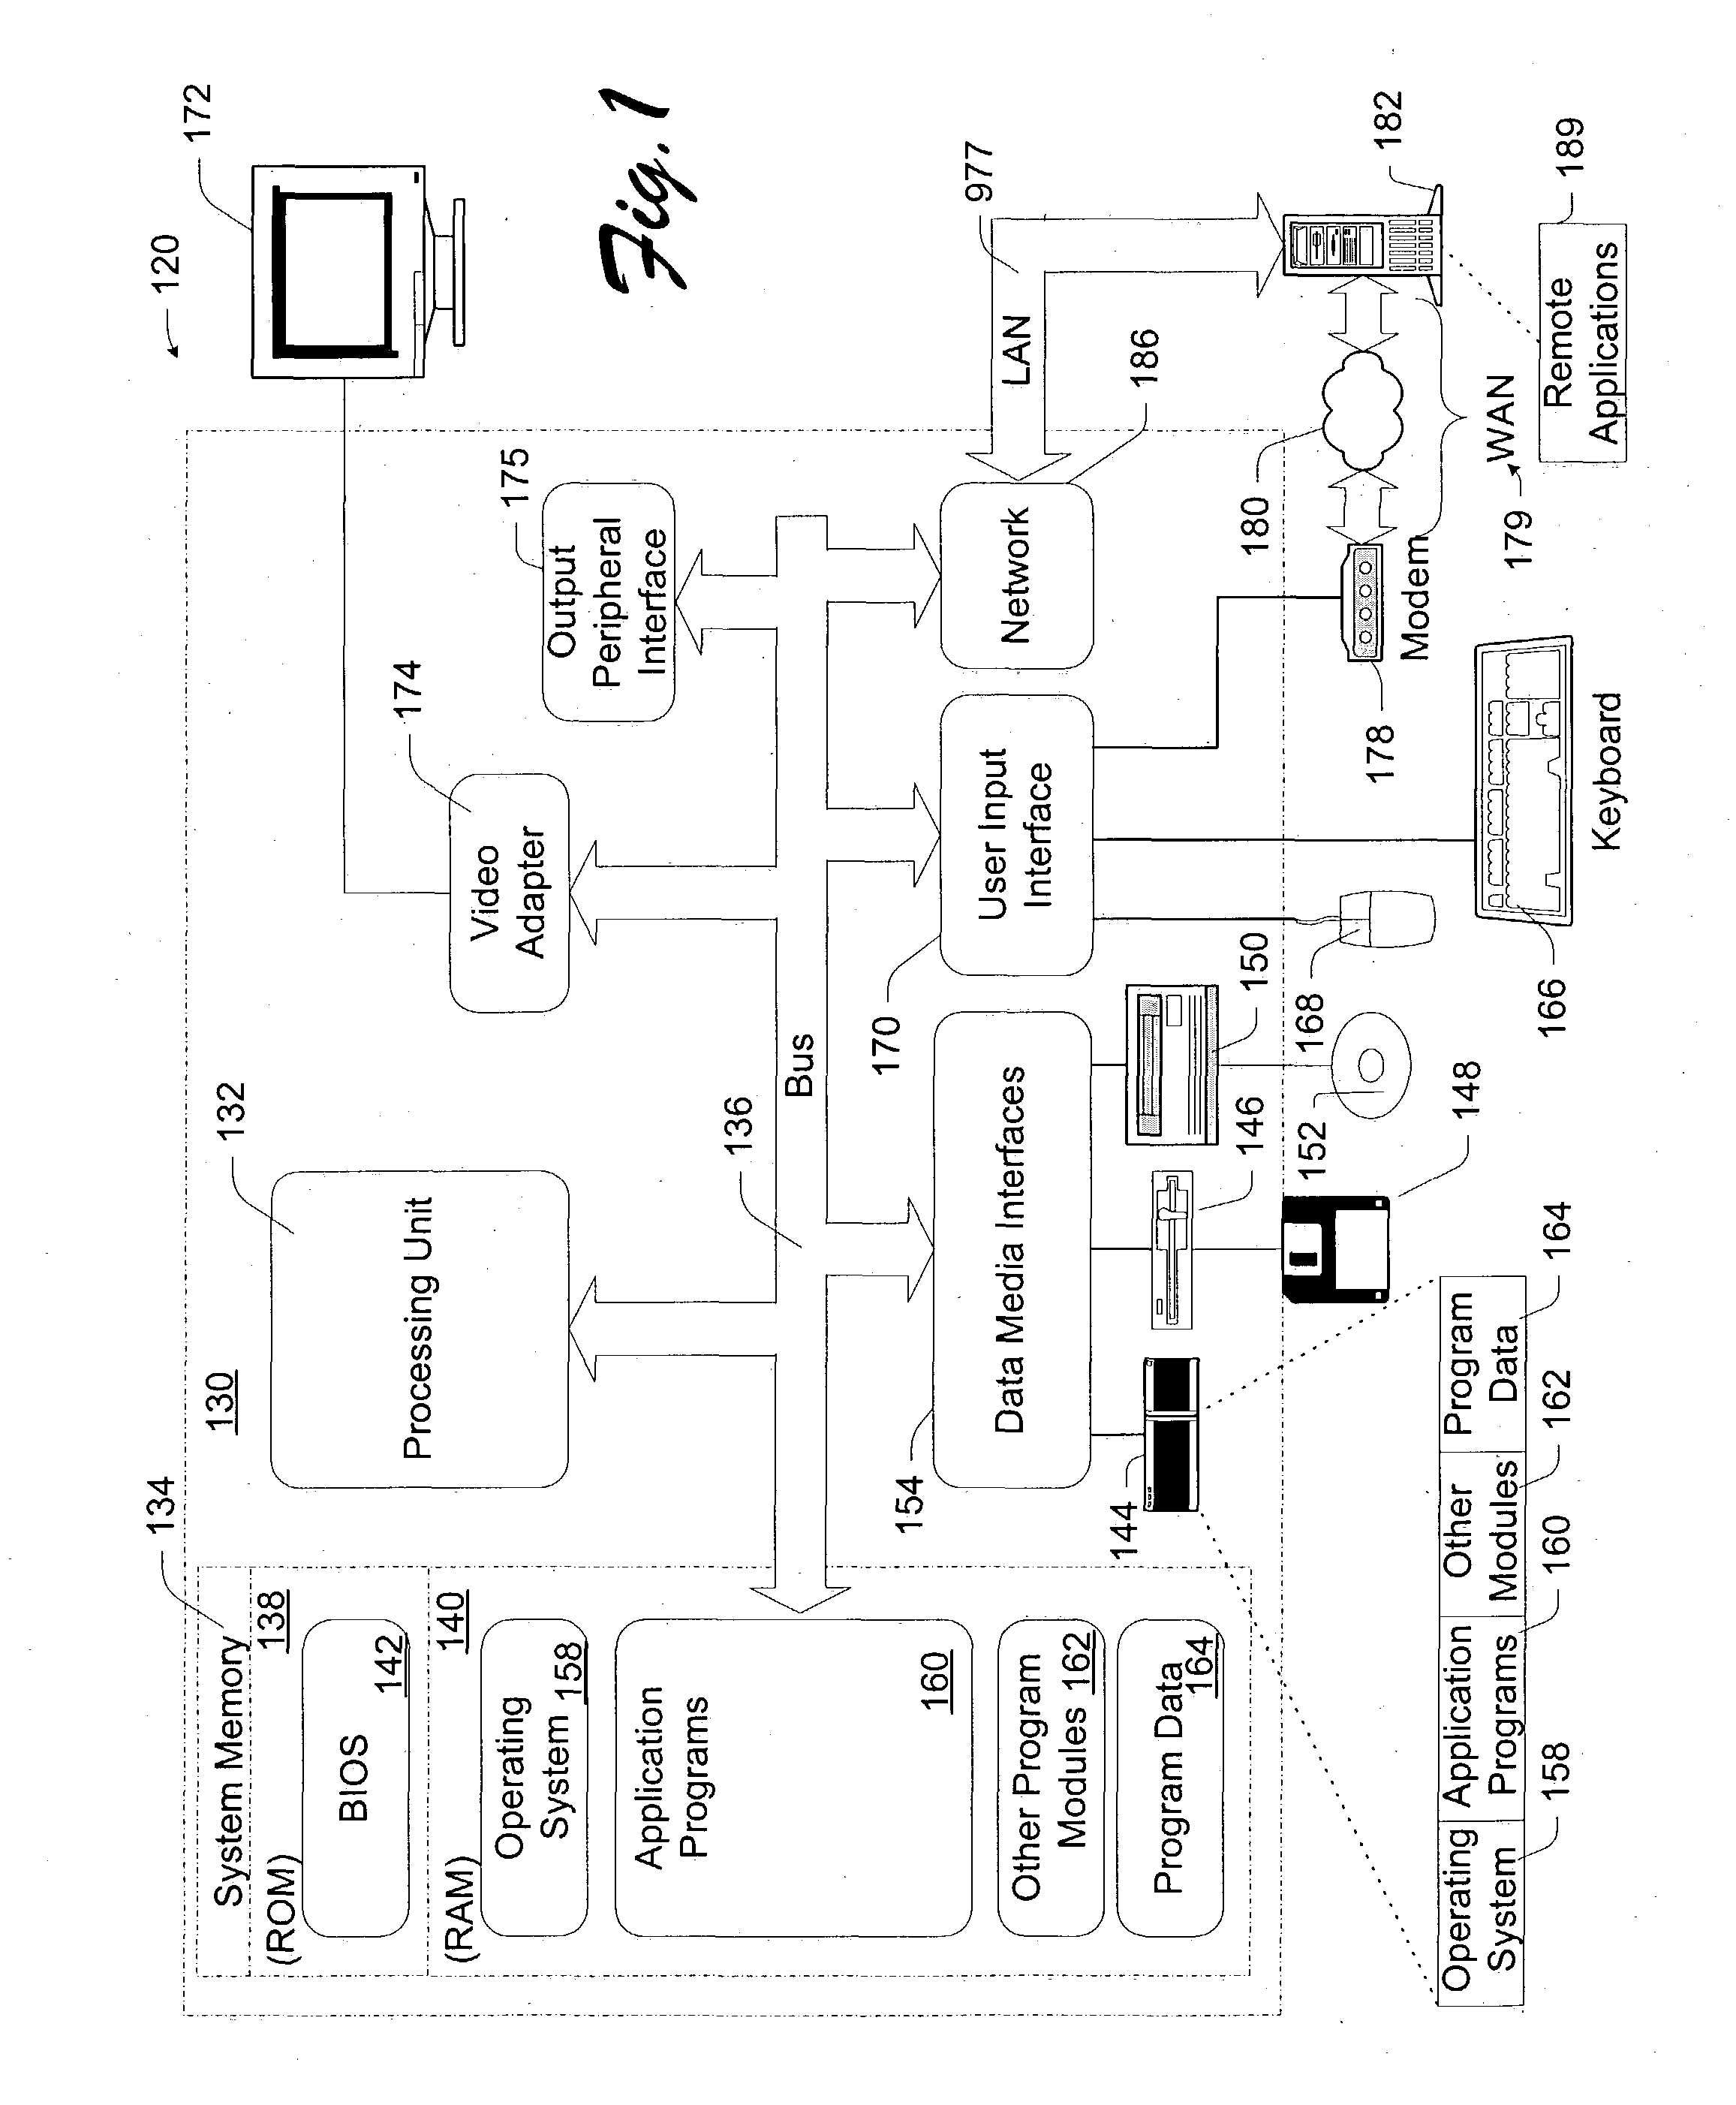 Robust multi-view face detection methods and apparatuses